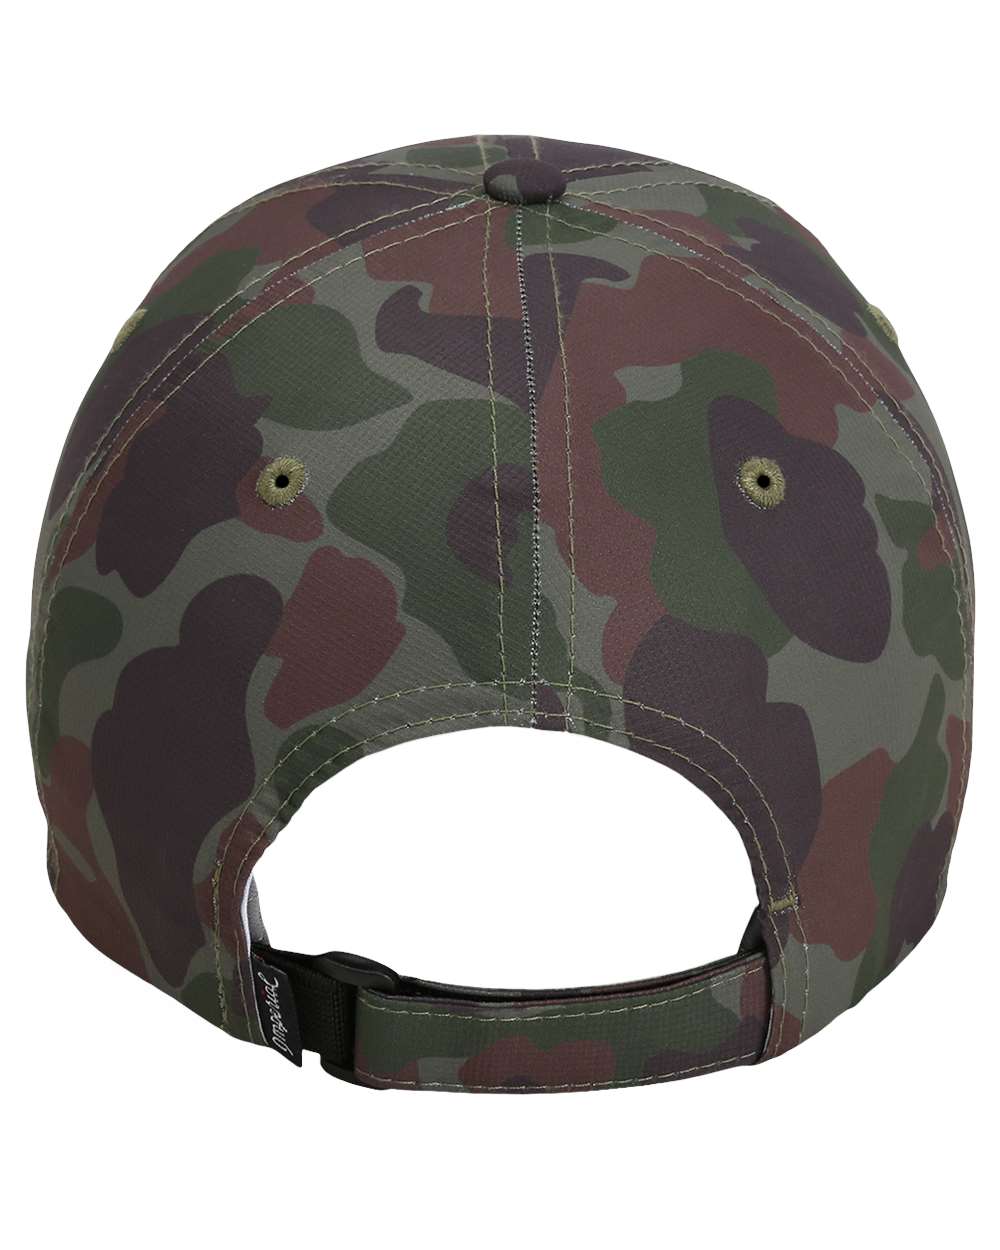 imperial dna frog skin camo eather patch hats, custom camo patch hats, camo hats wholesale